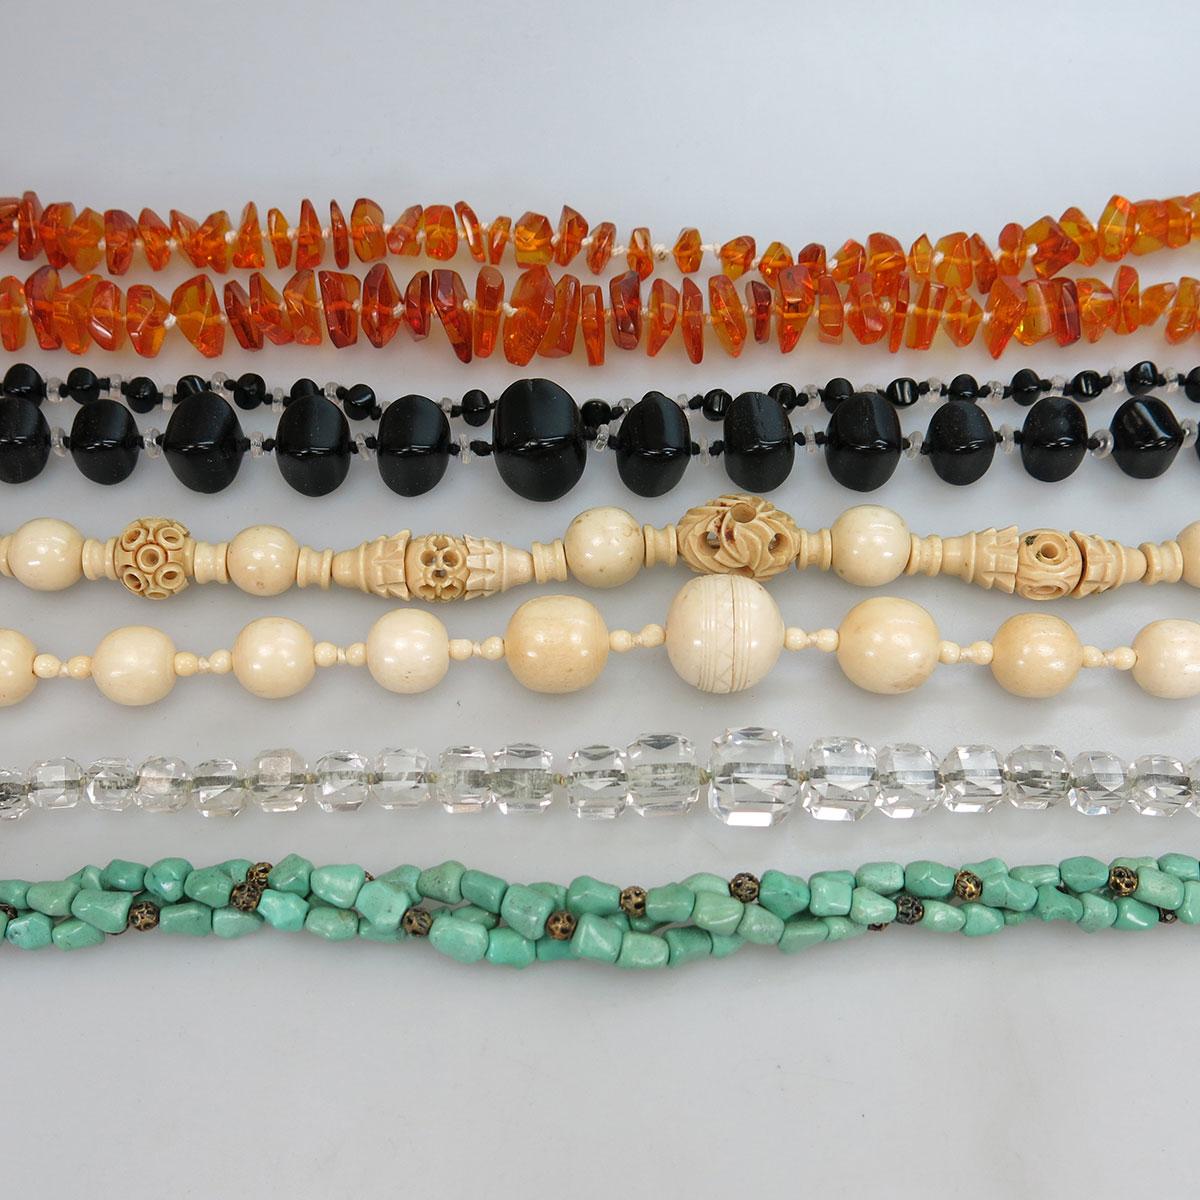 Large Quantity Of Bead Necklaces